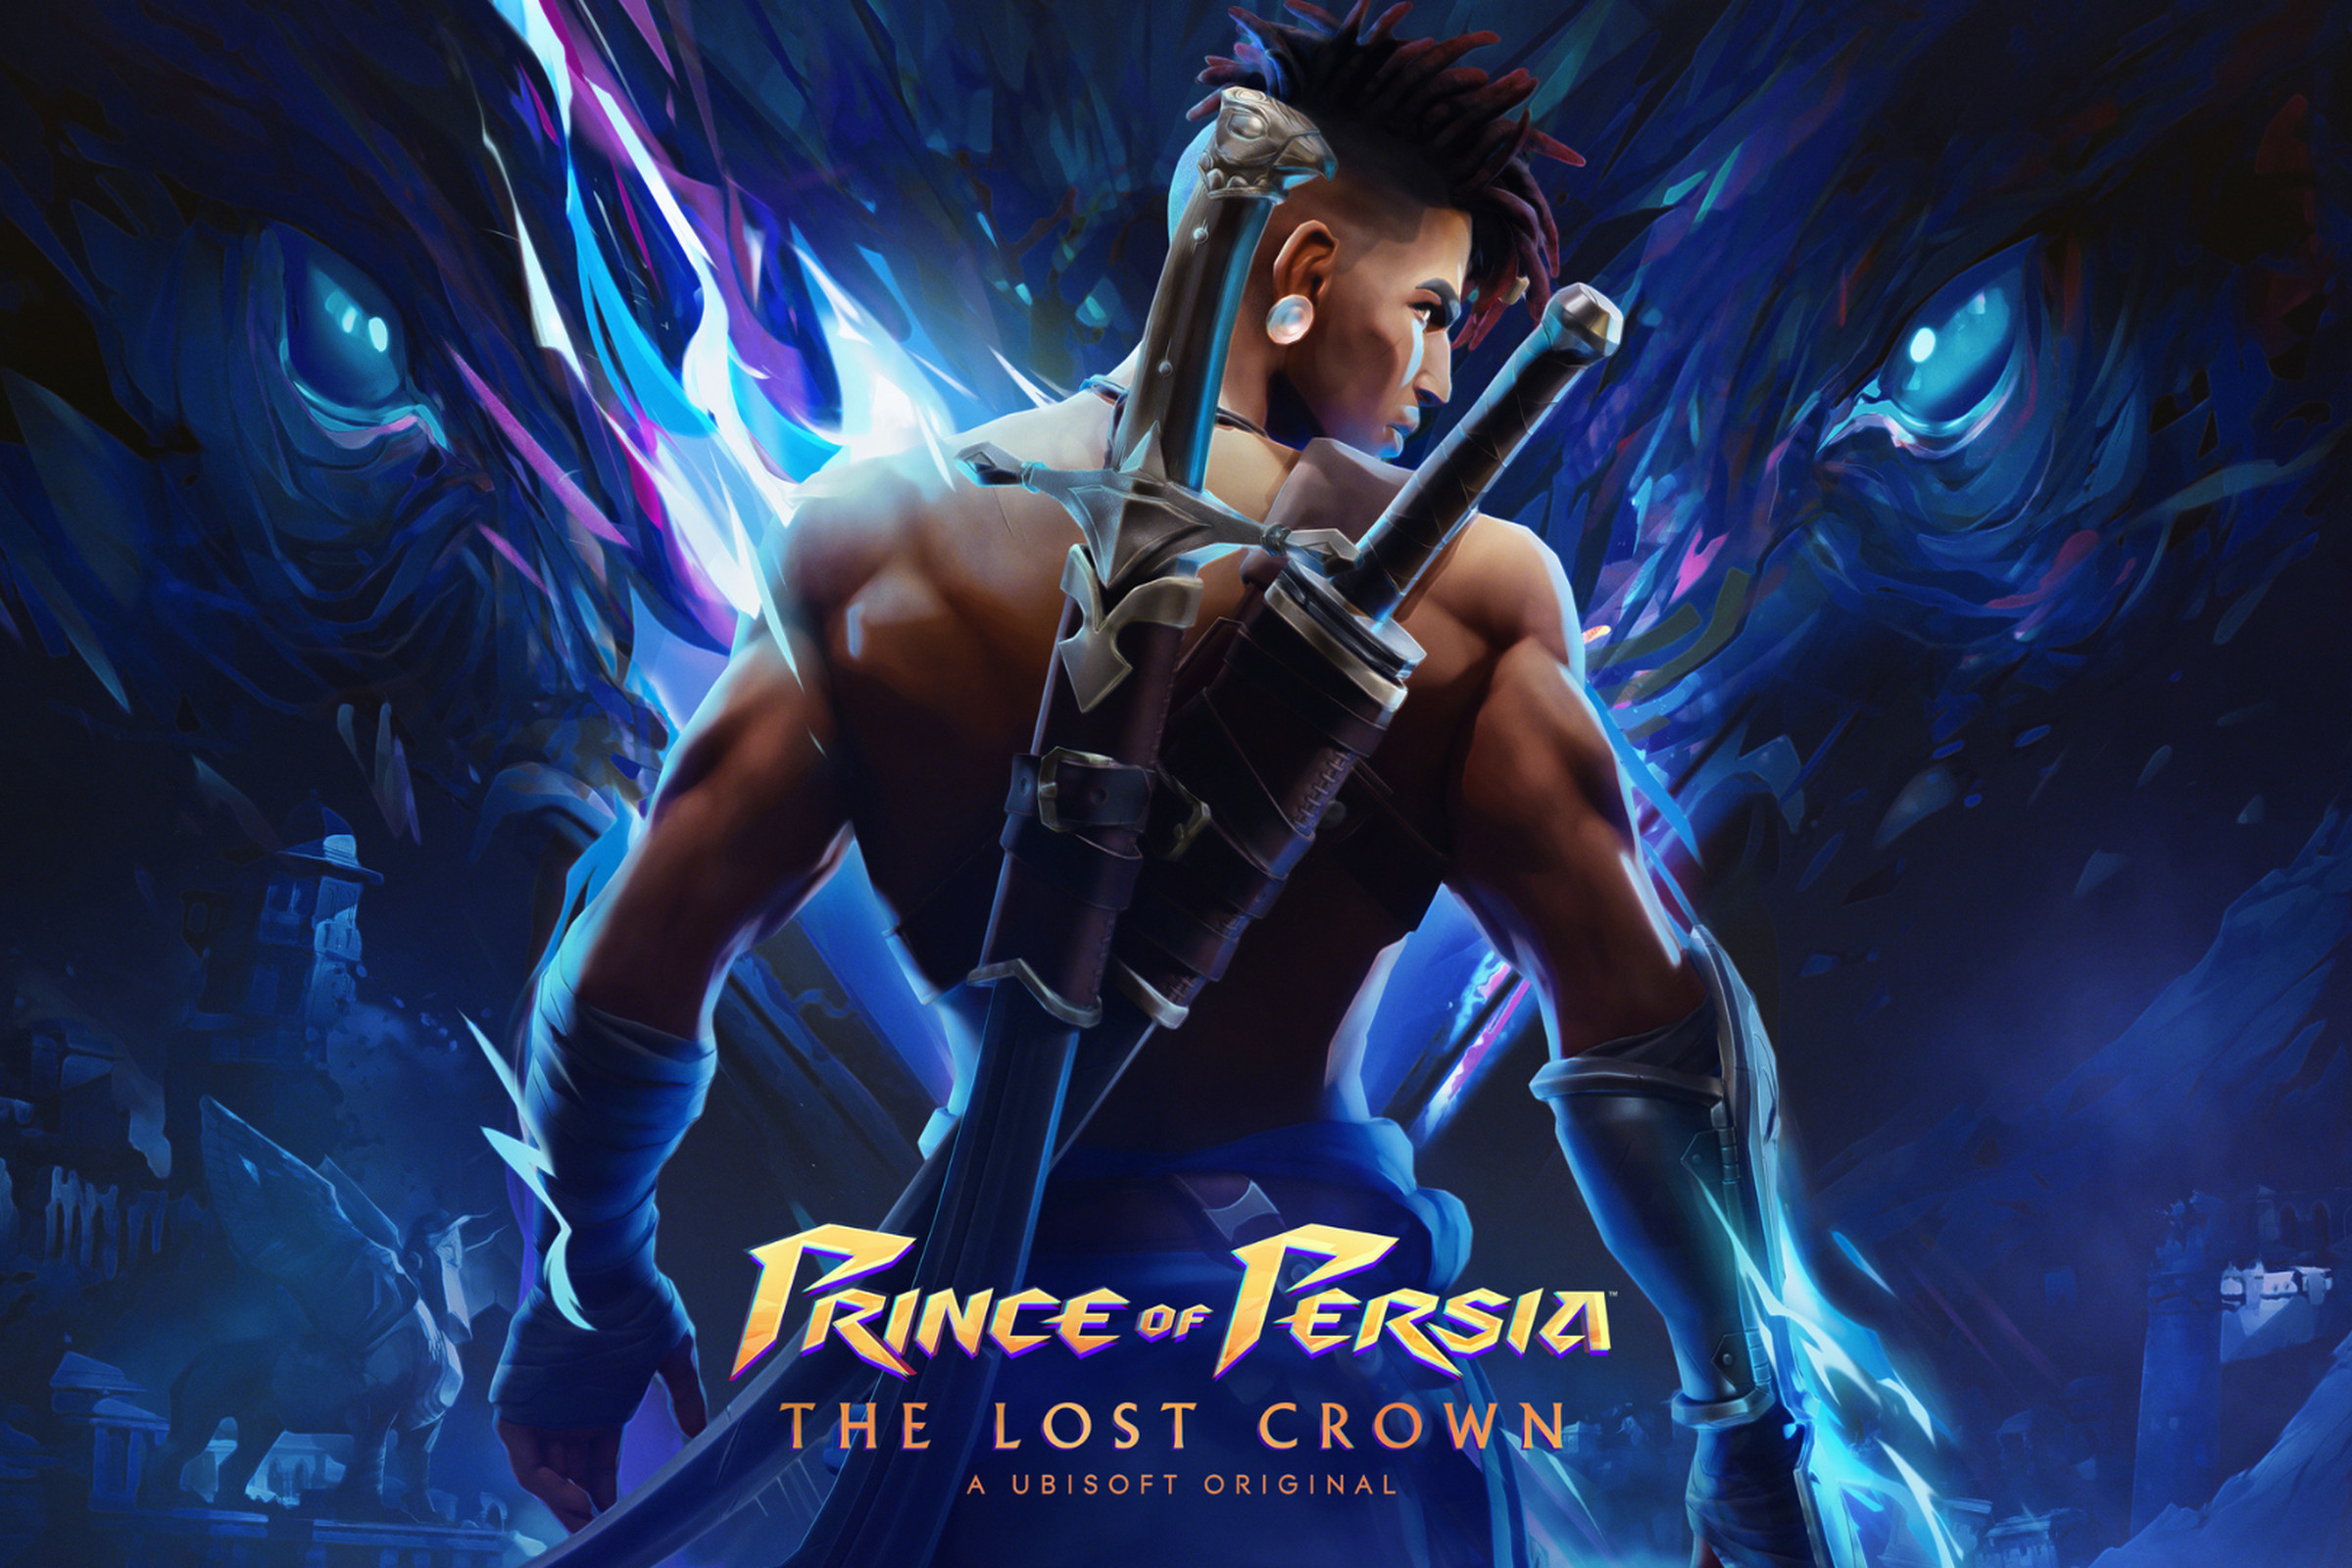 Key art from Prince of Persia: The Lost Crown featuring main character Sargon looking over his shoulder at the viewer.